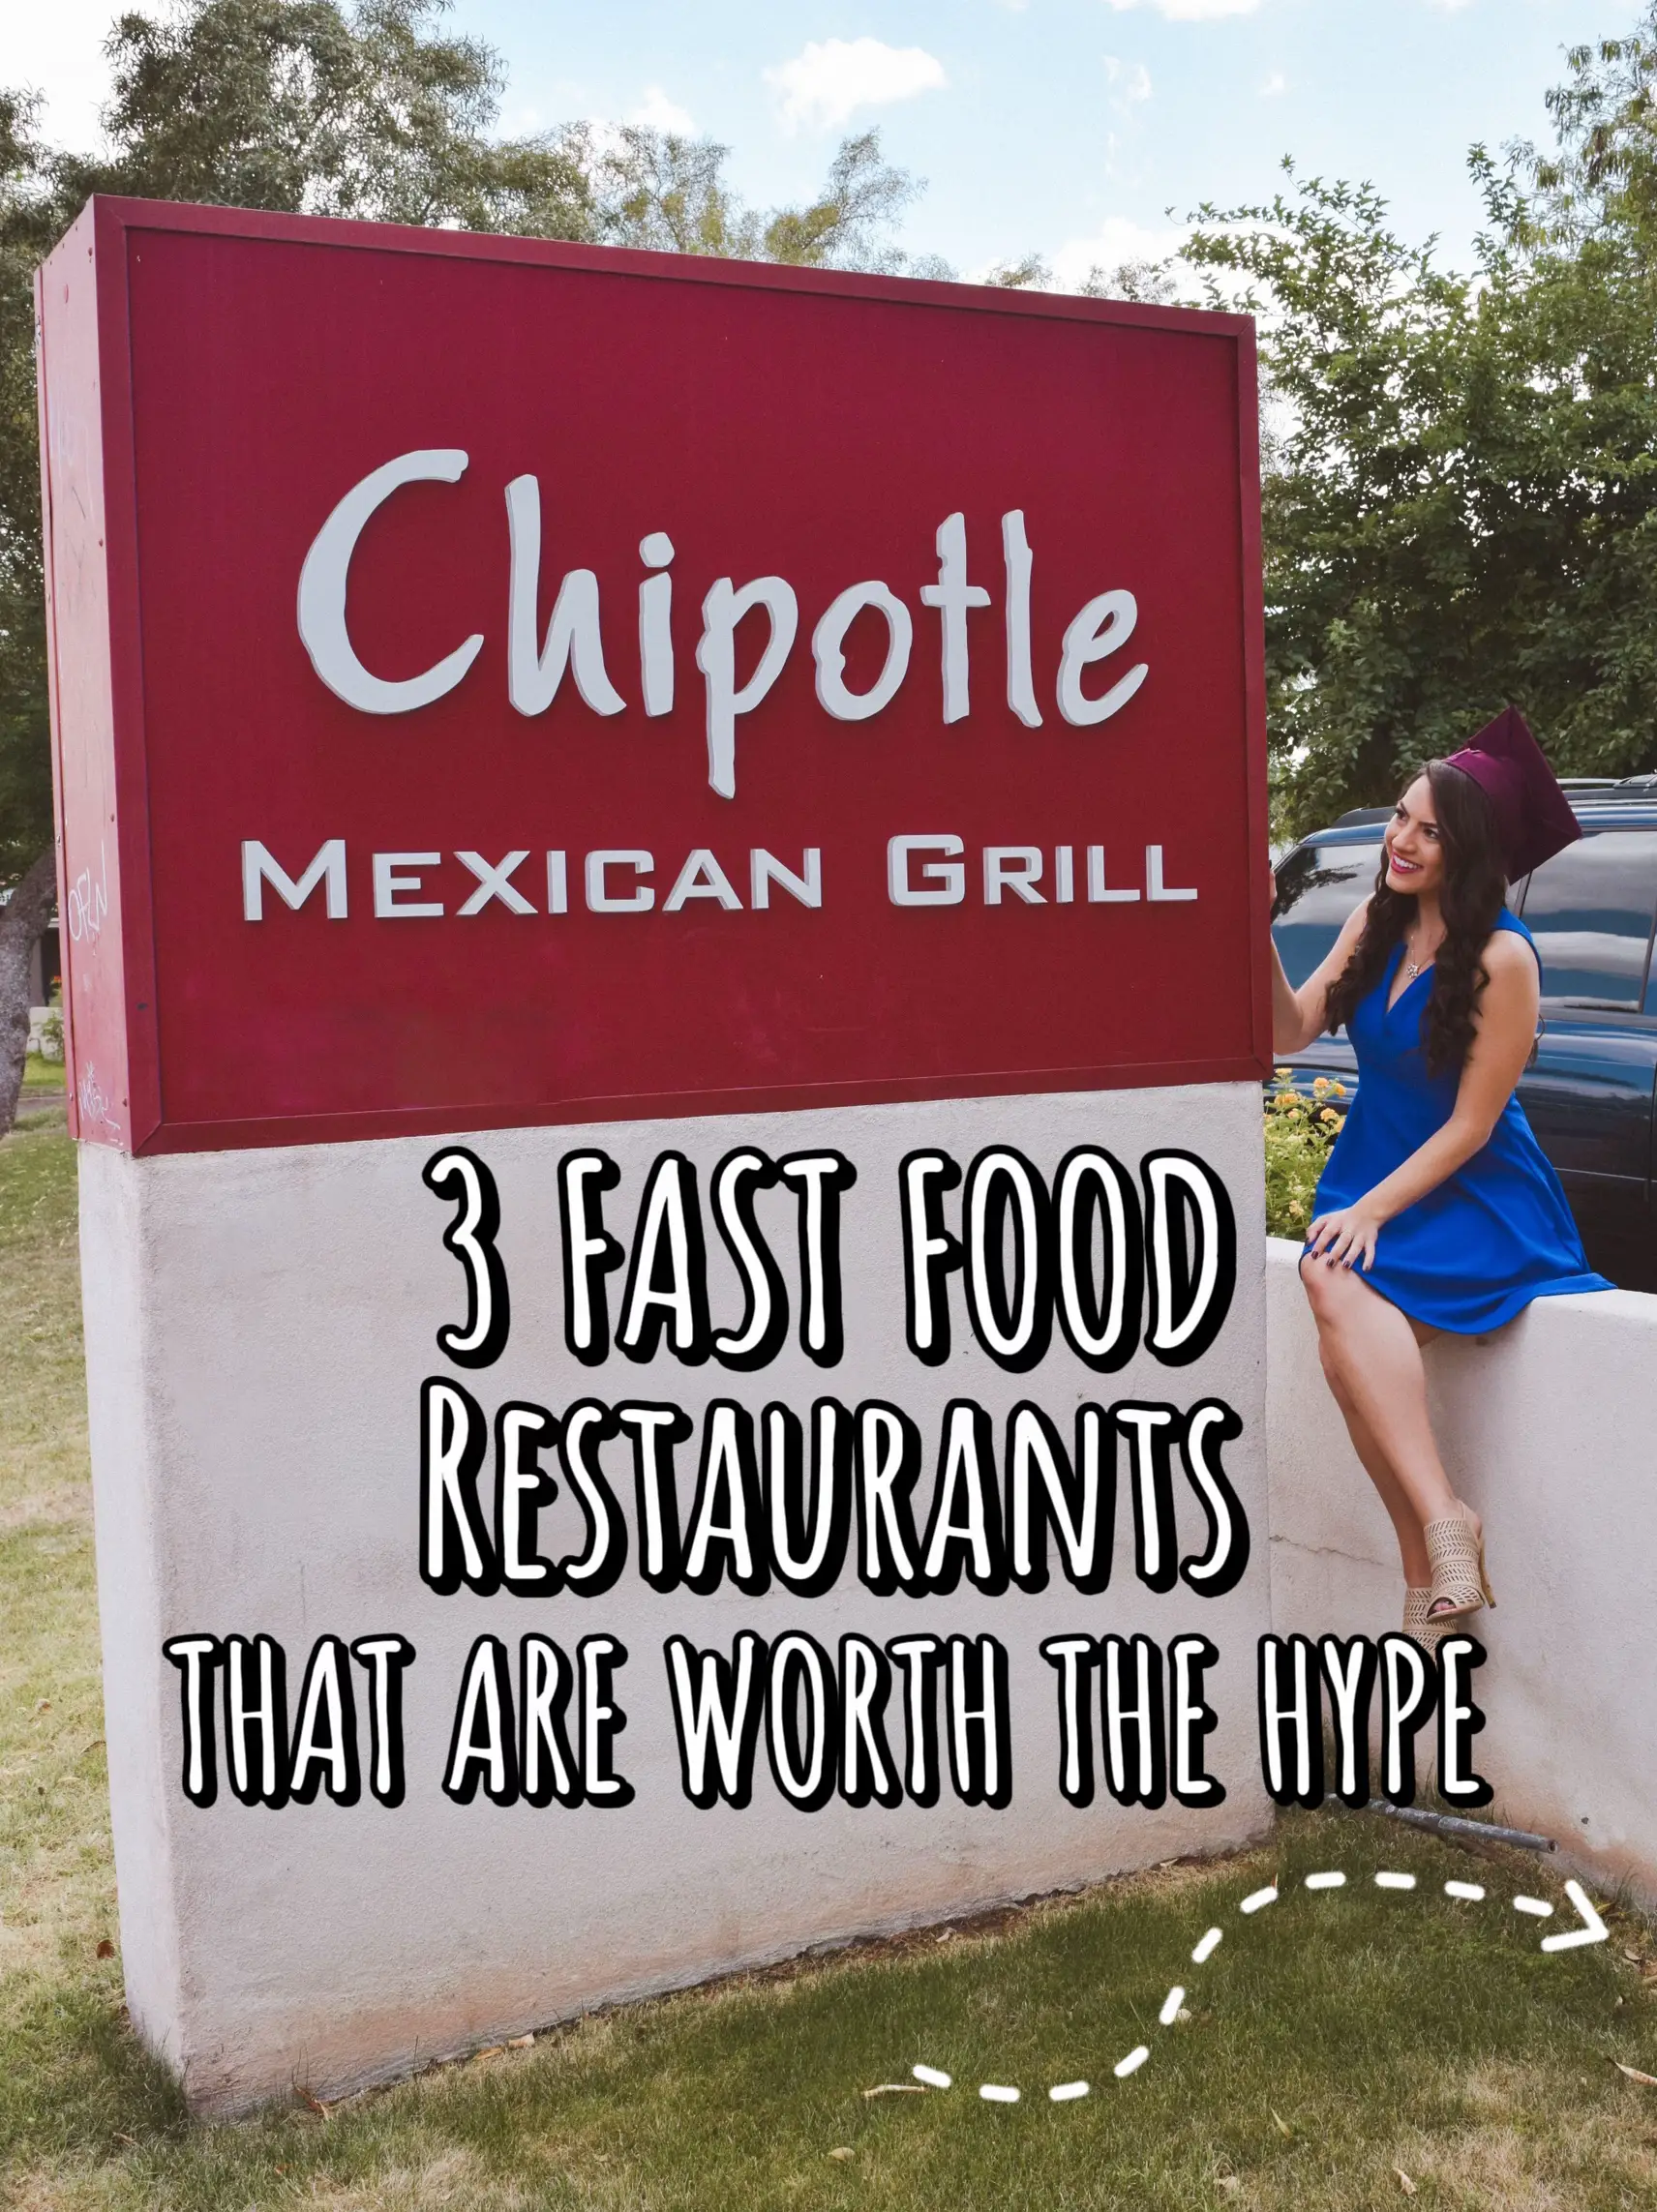 3 Fast Food Restaurants Worth The Hype 🌯's images